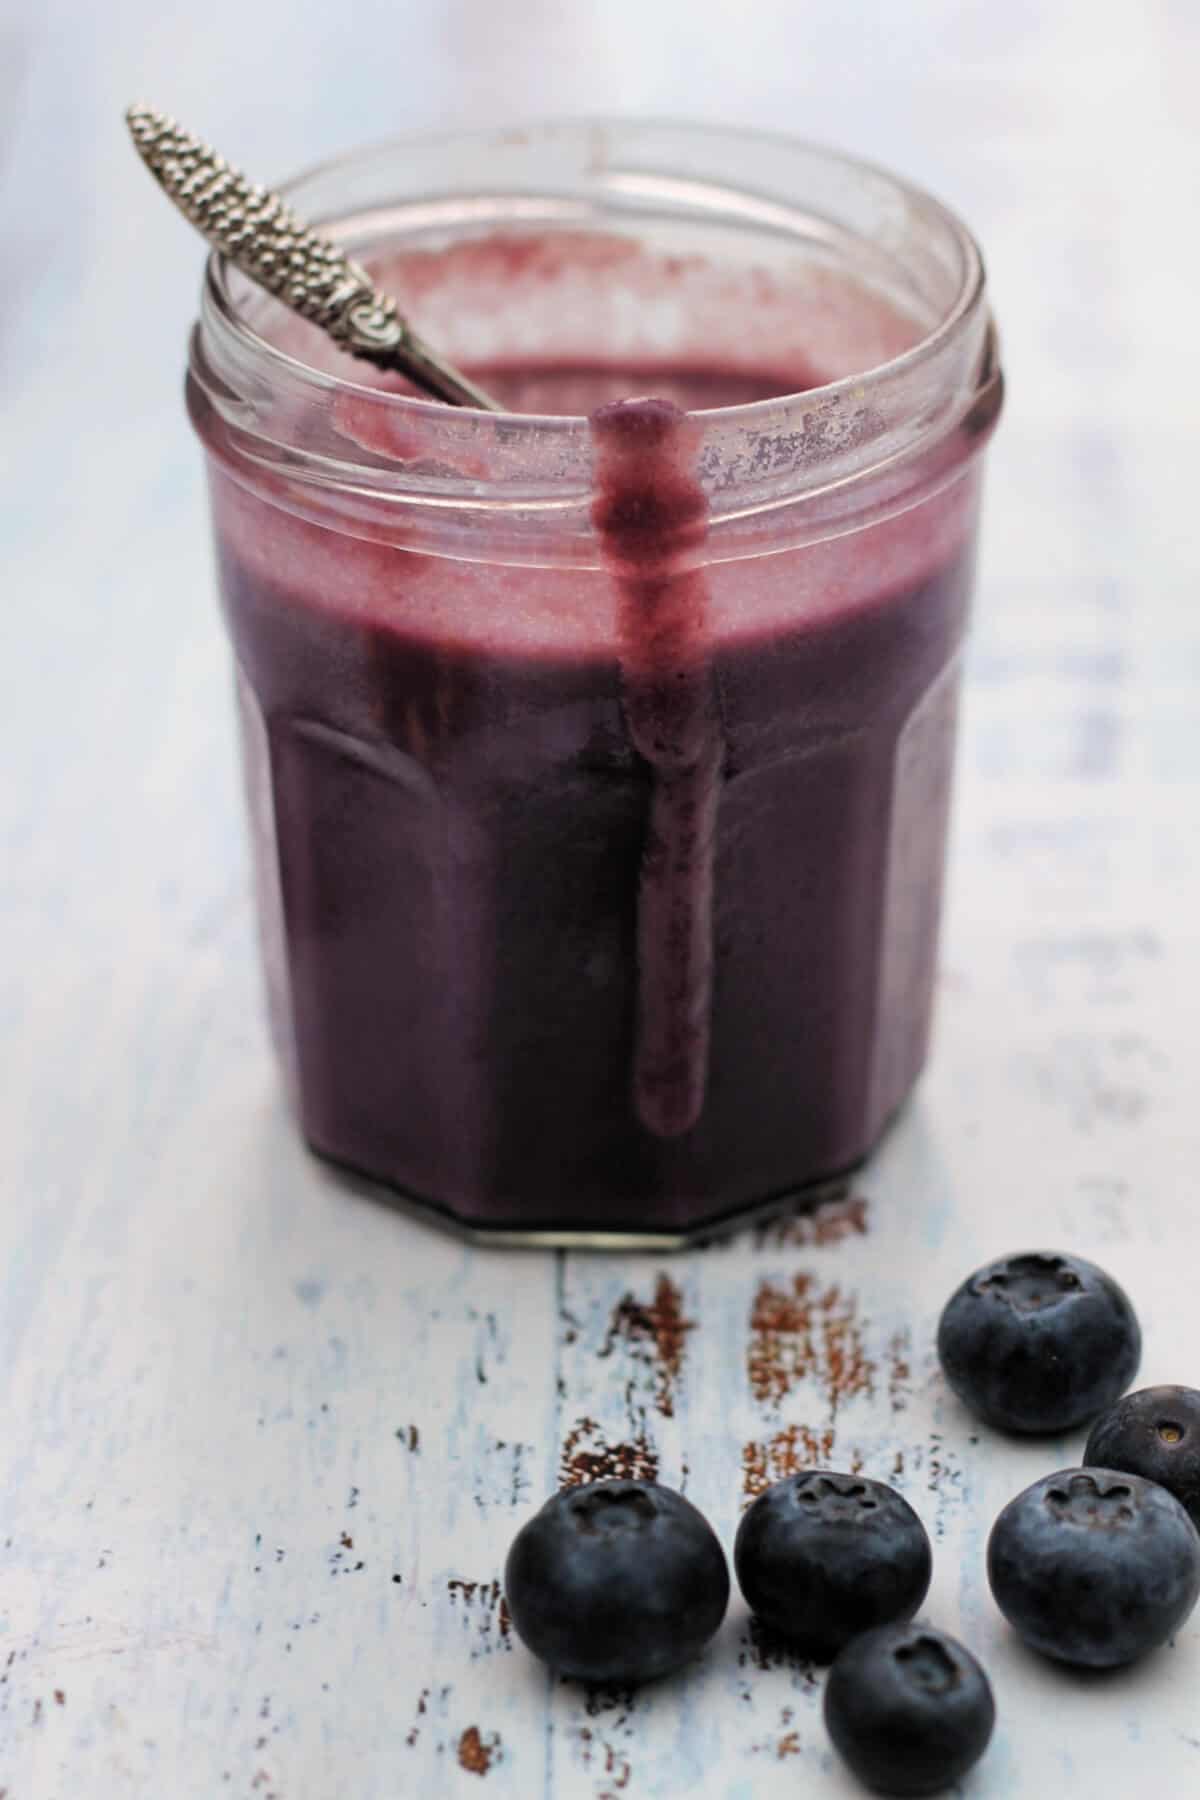 Jar of blueberry curd with drip down the side, spoon in jar, with a few blueberries beside it.